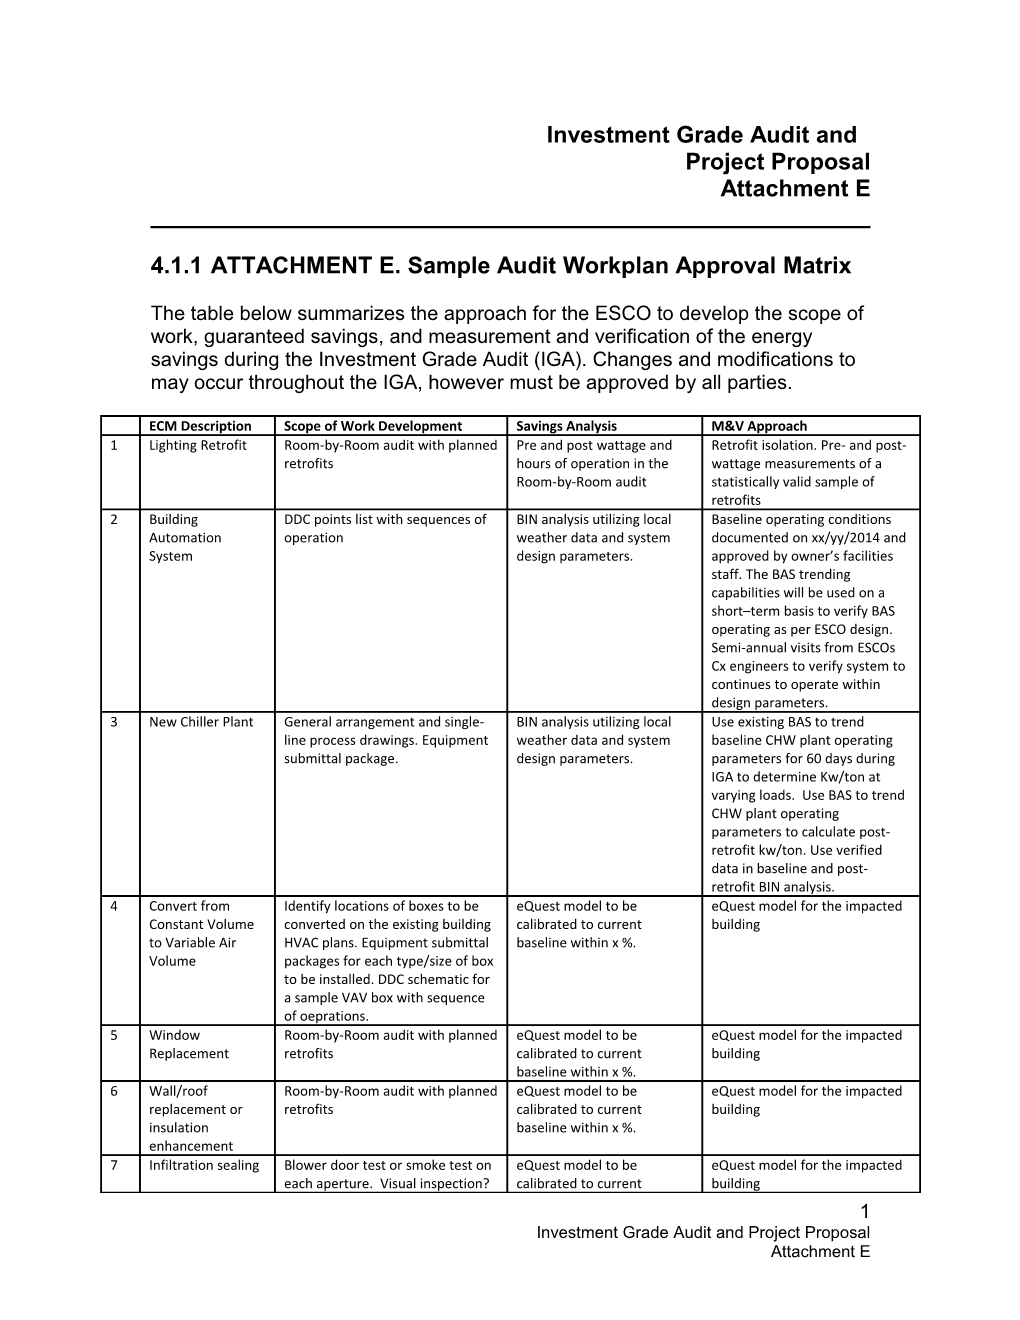 Investment Grade Audit and Project Proposal Attachment E: Sample Audit Workplan Approval Matrix